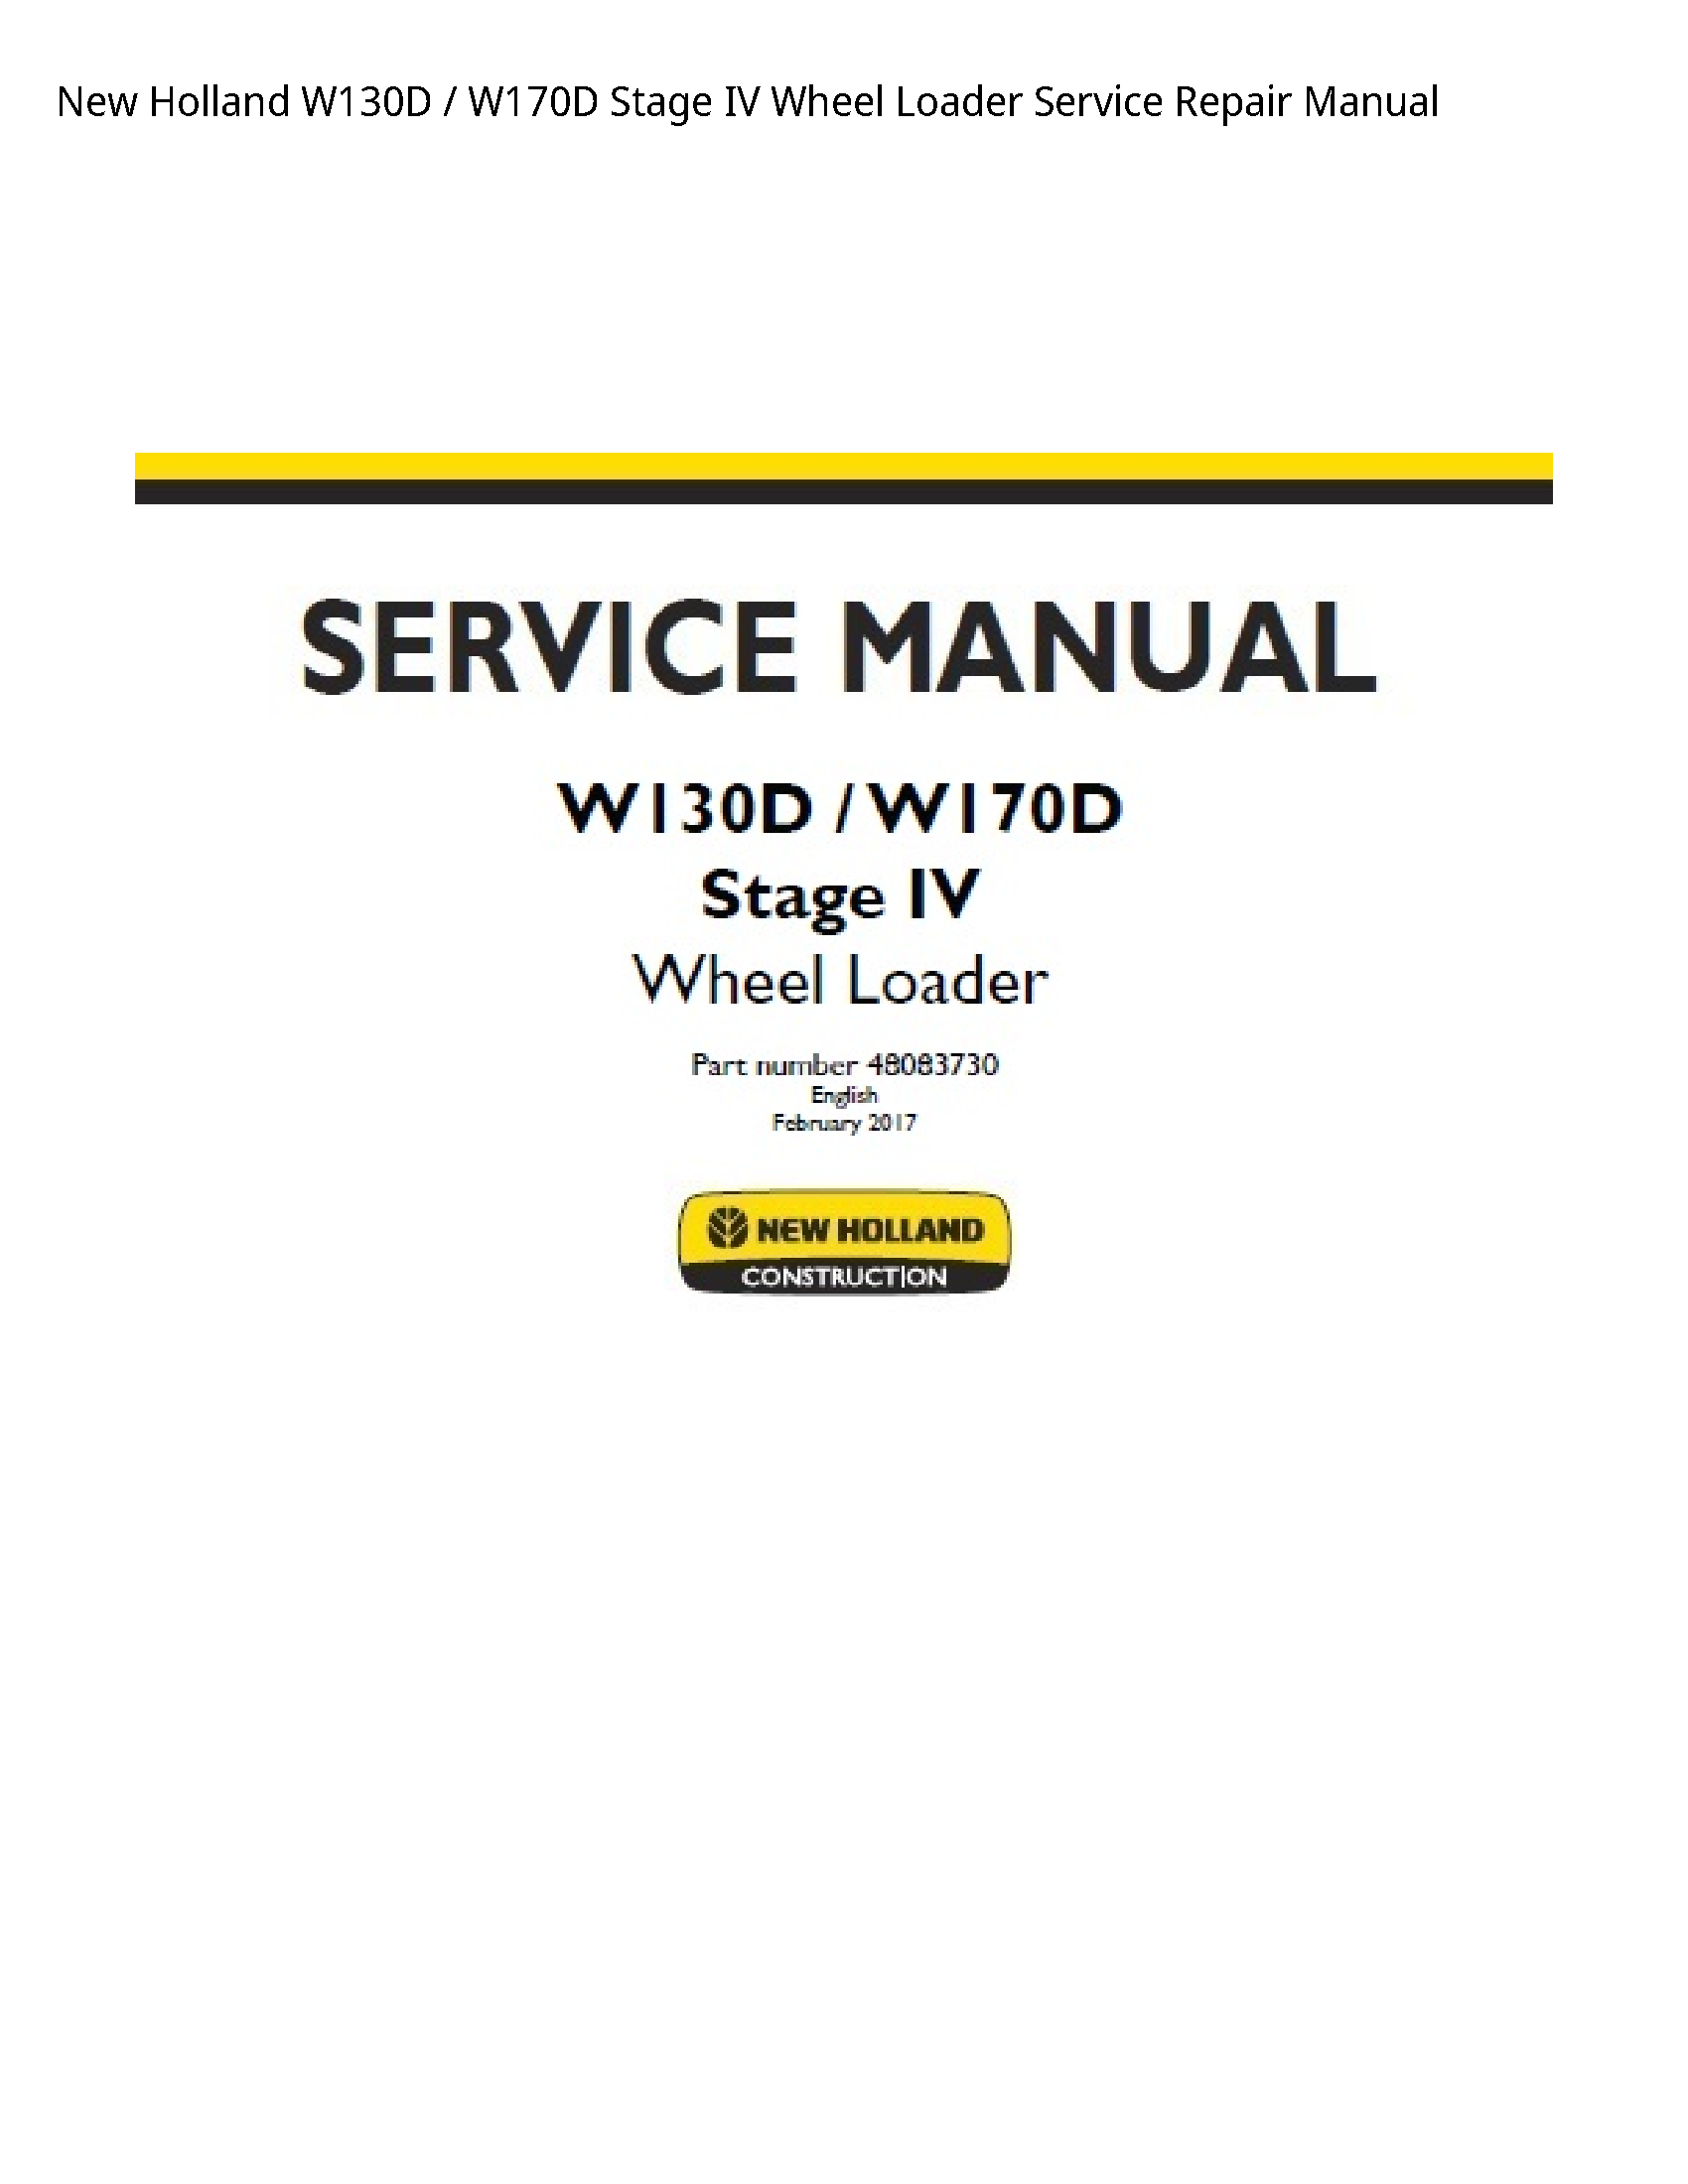 New Holland W130D Stage IV Wheel Loader manual